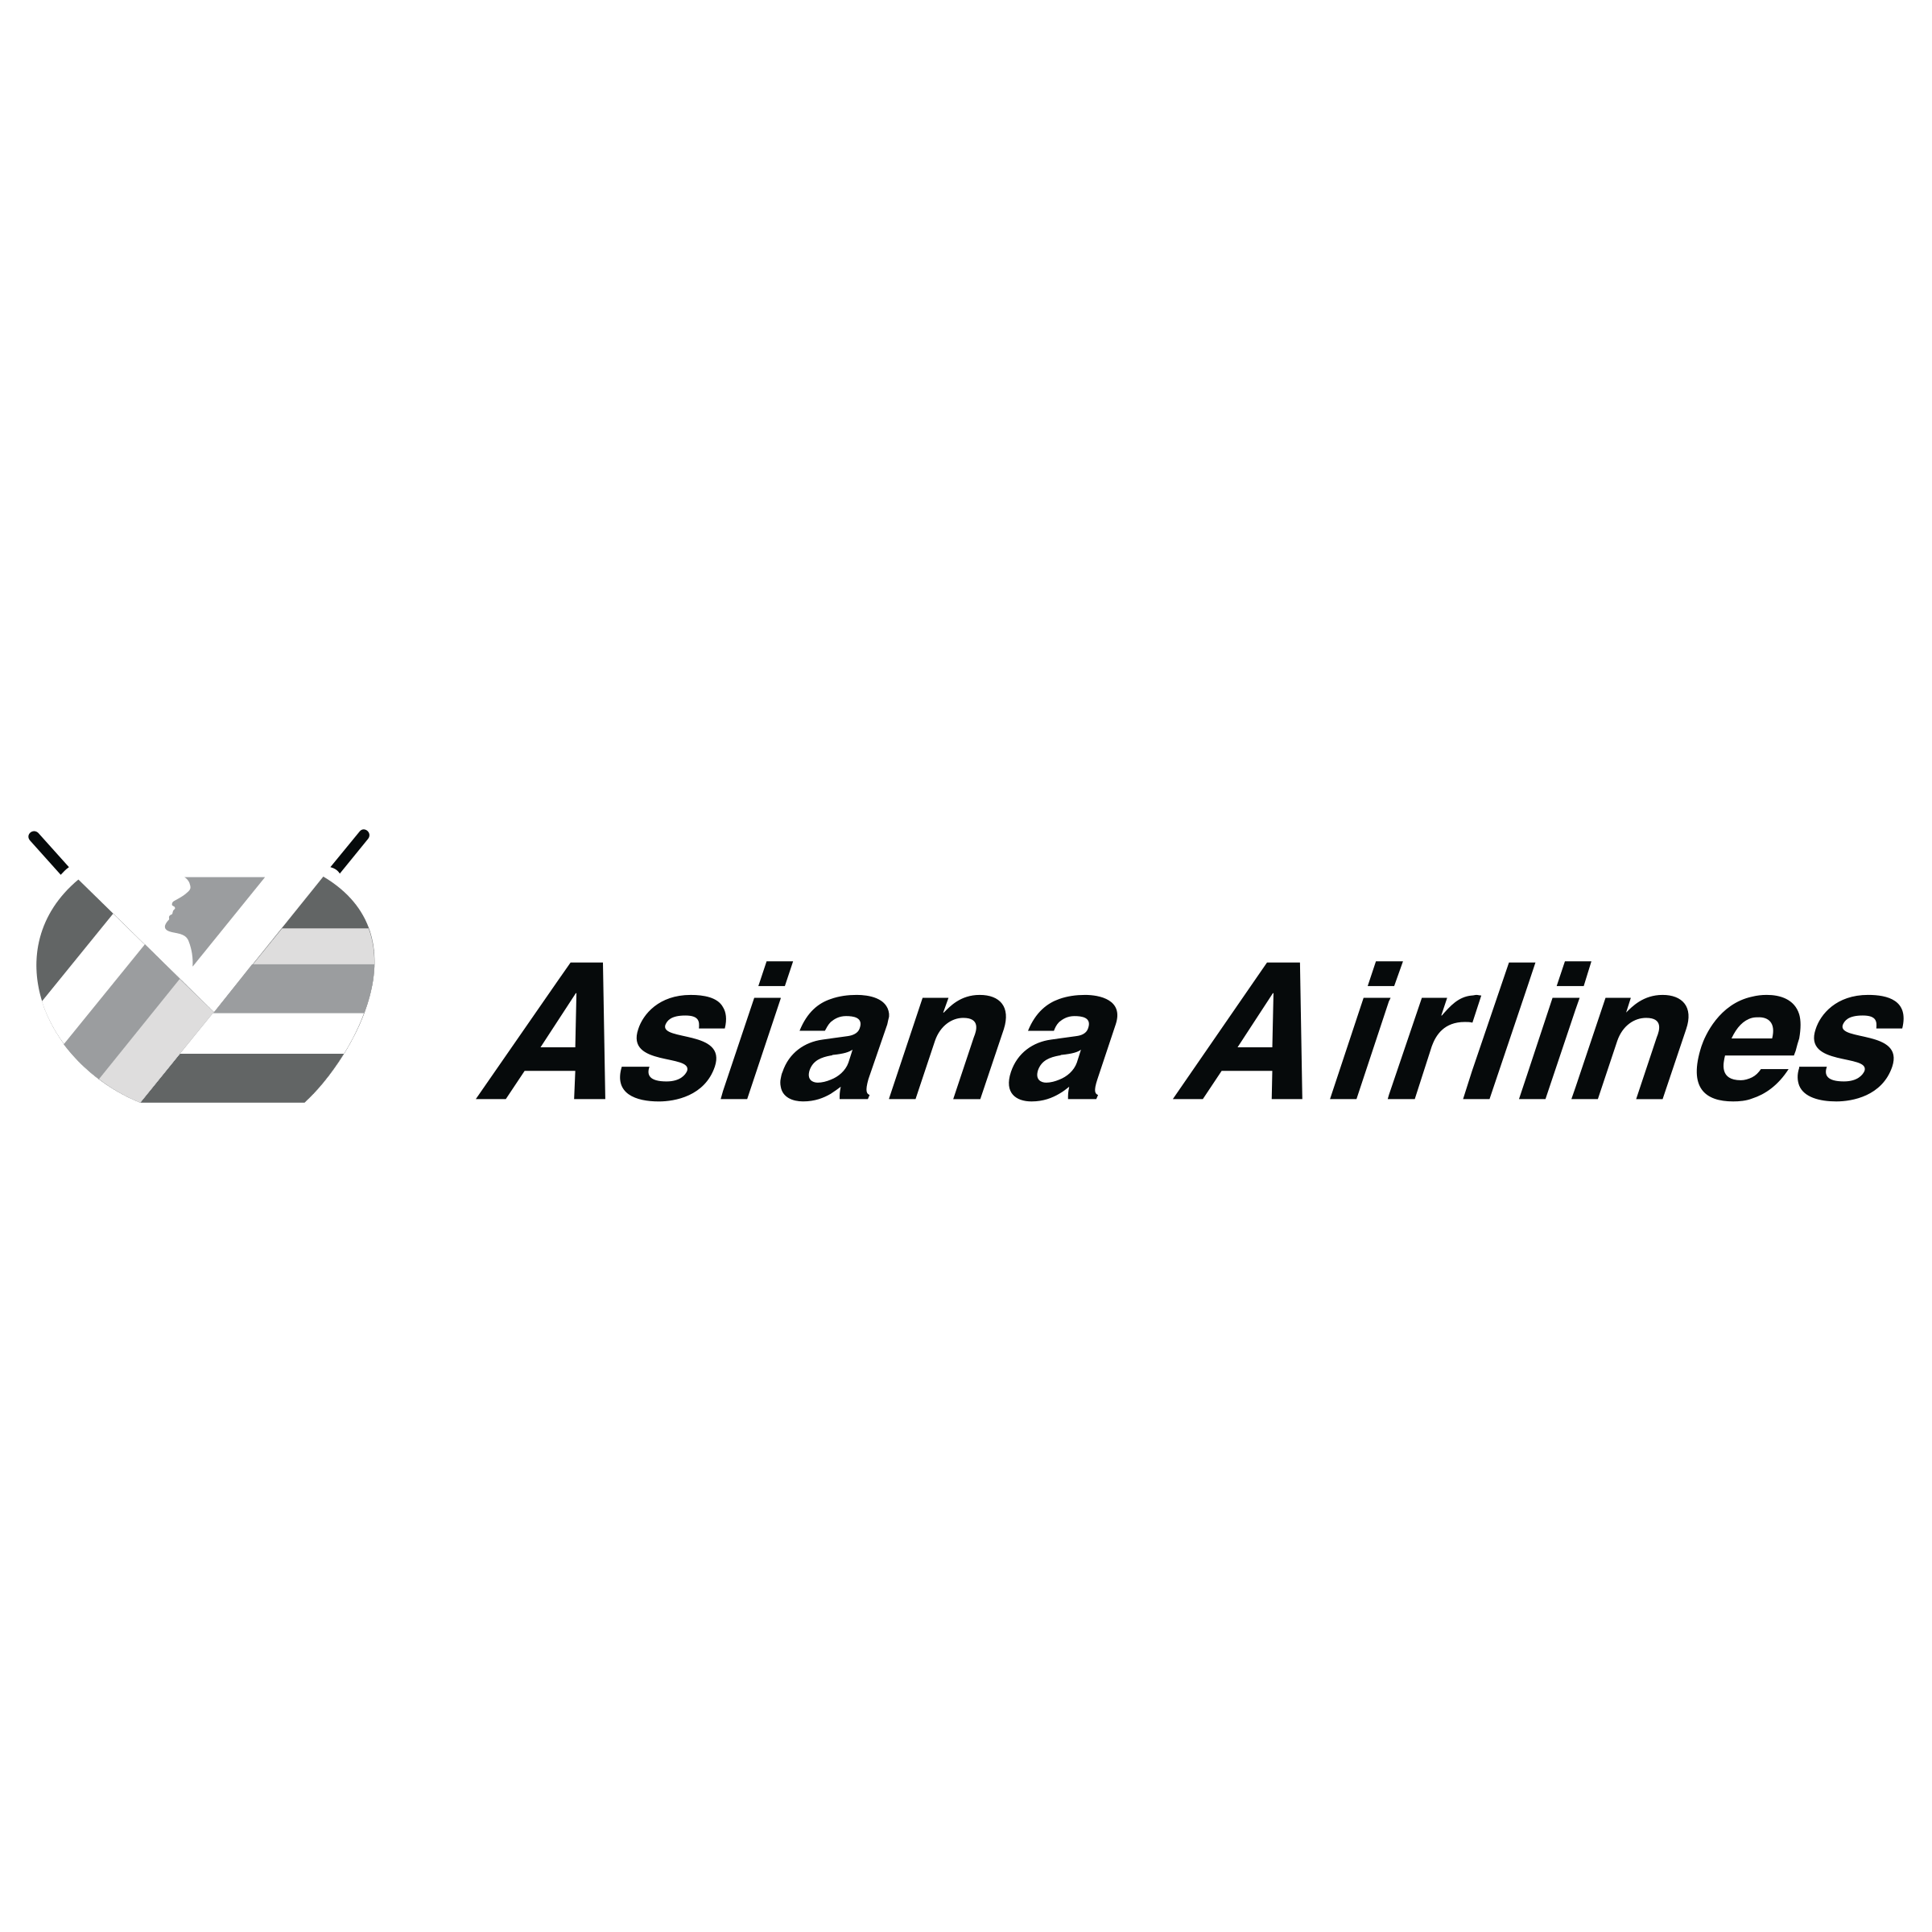 Asiana Logo - Asiana Airlines Logo PNG Transparent & SVG Vector - Freebie Supply